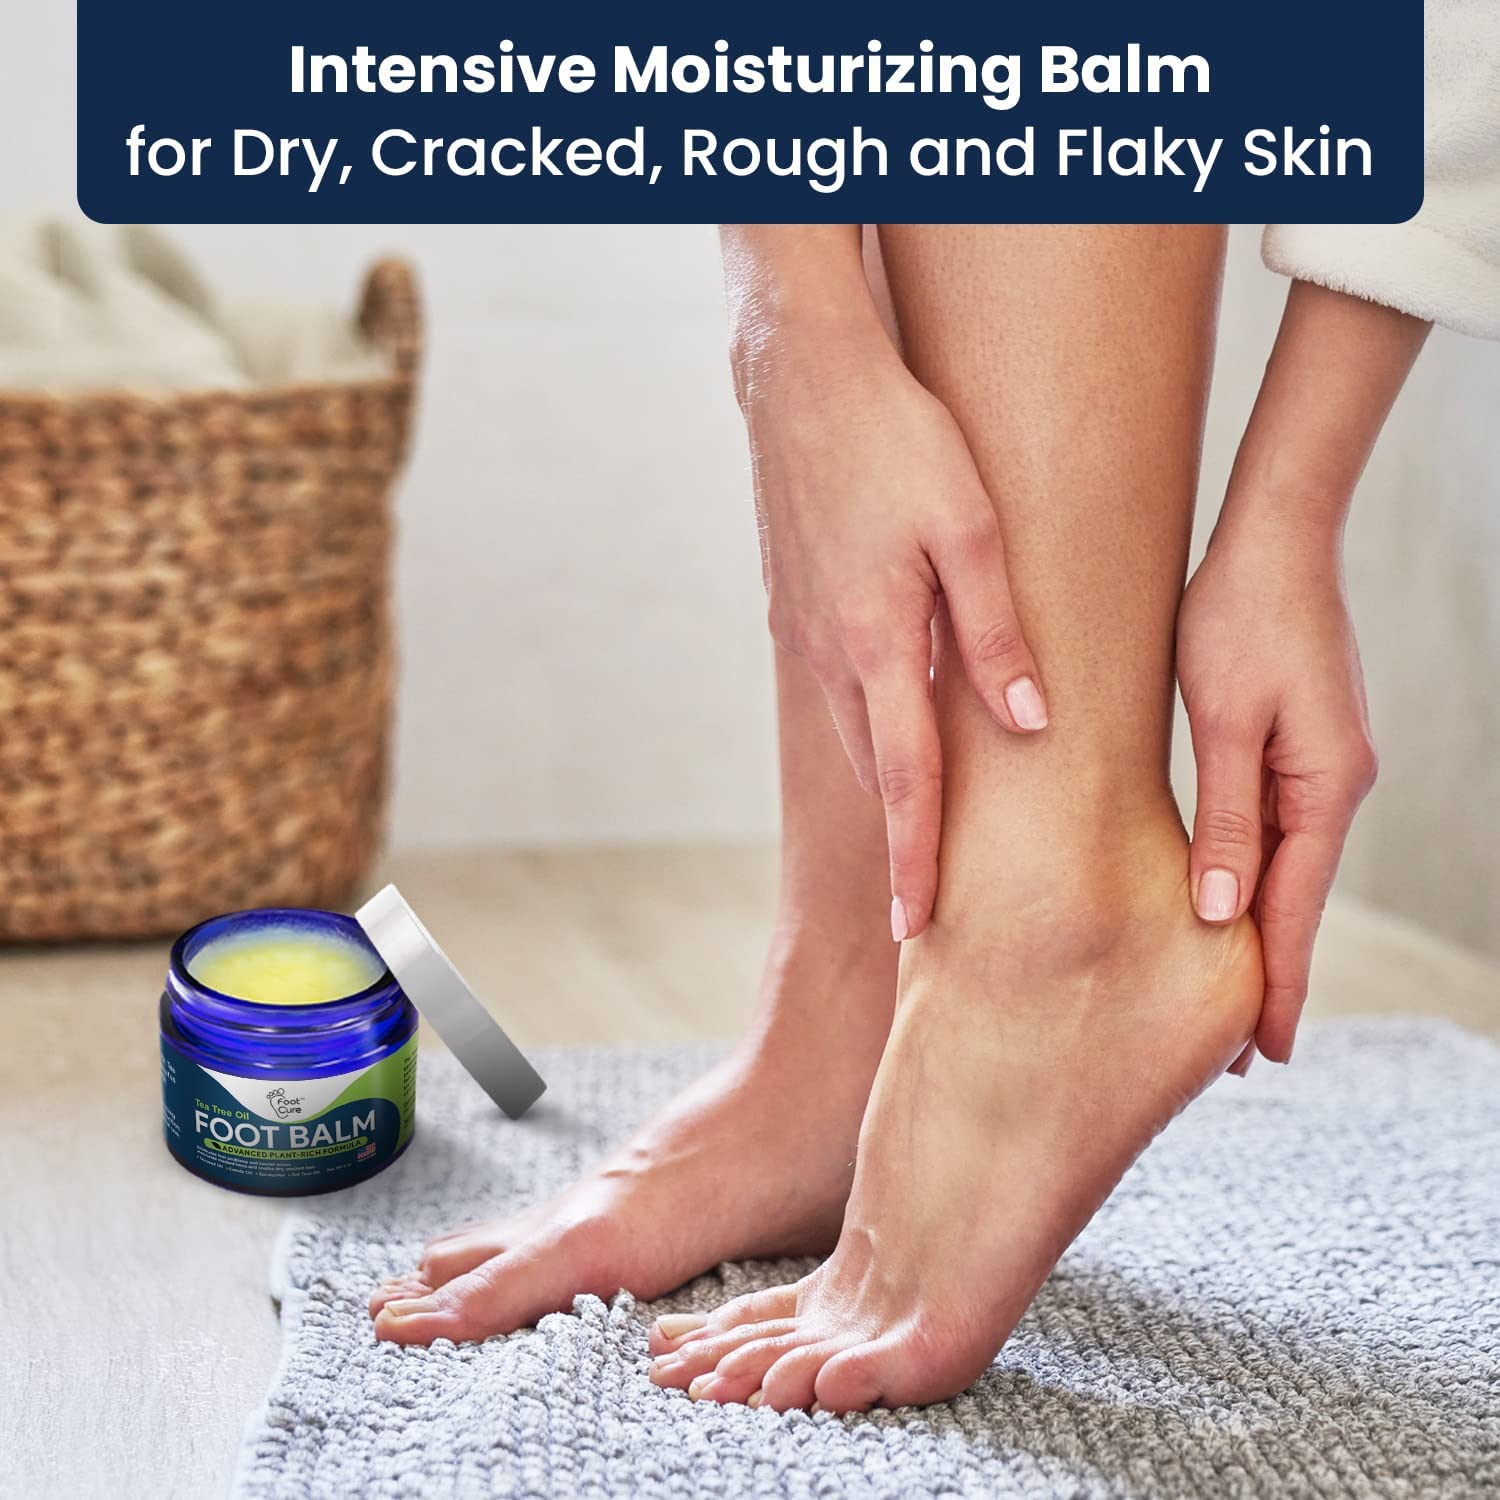 Tea Tree Oil Foot Balm - Soothing Moisturizer for Dry, Cracked Feet - Hydrating & Organic - 2oz - Made in USA